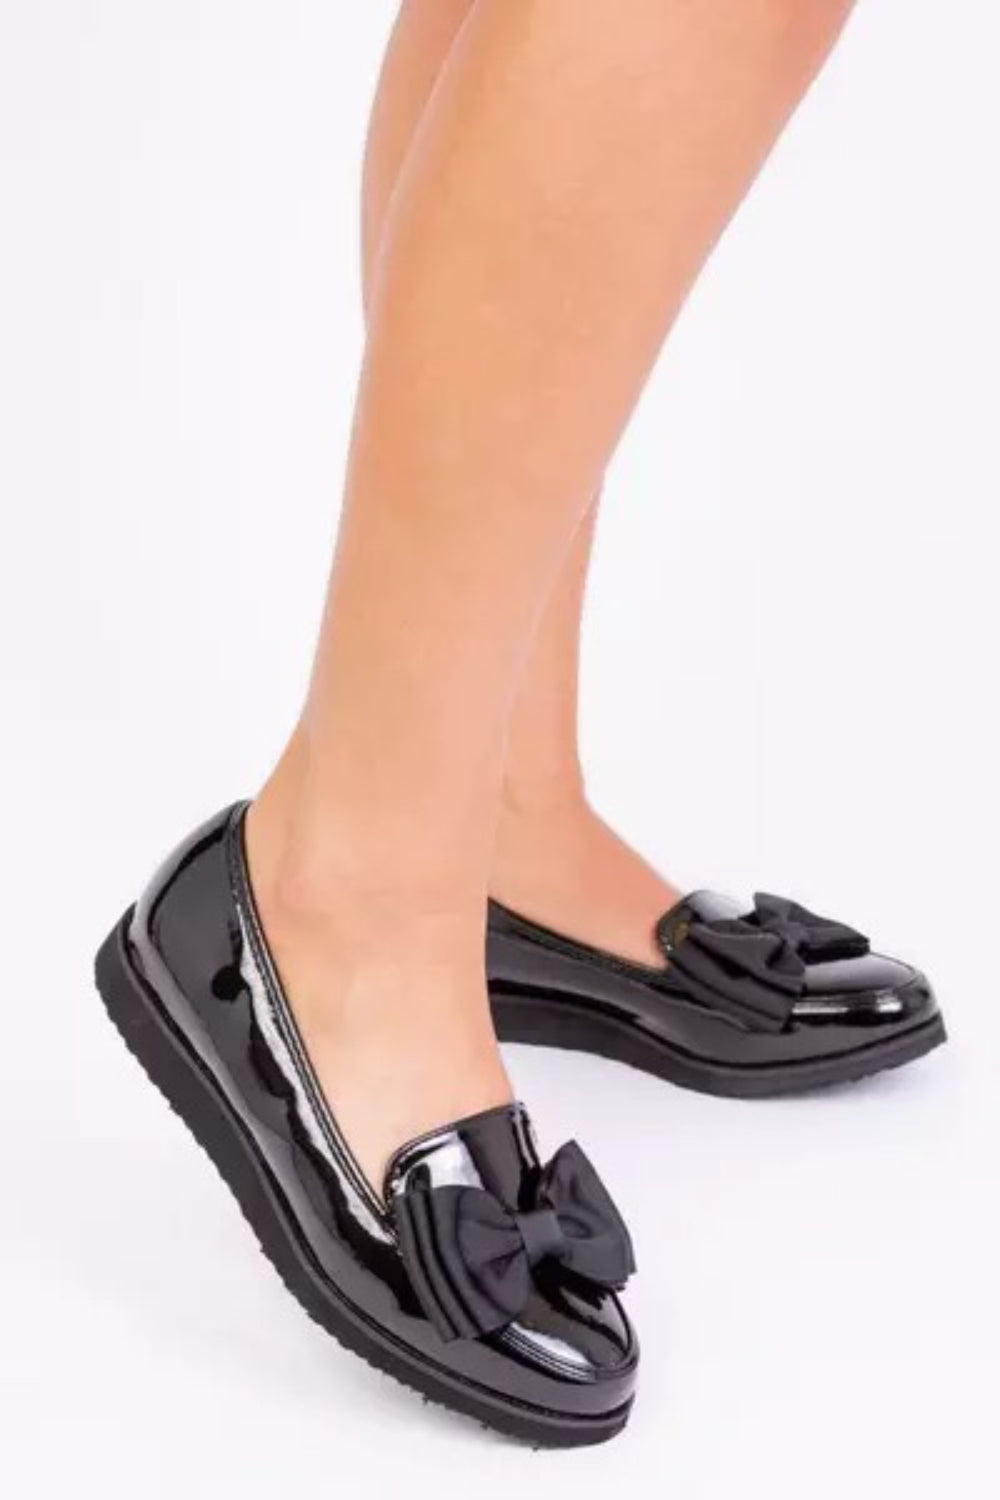 Black Patent Chunky Bow Loafers